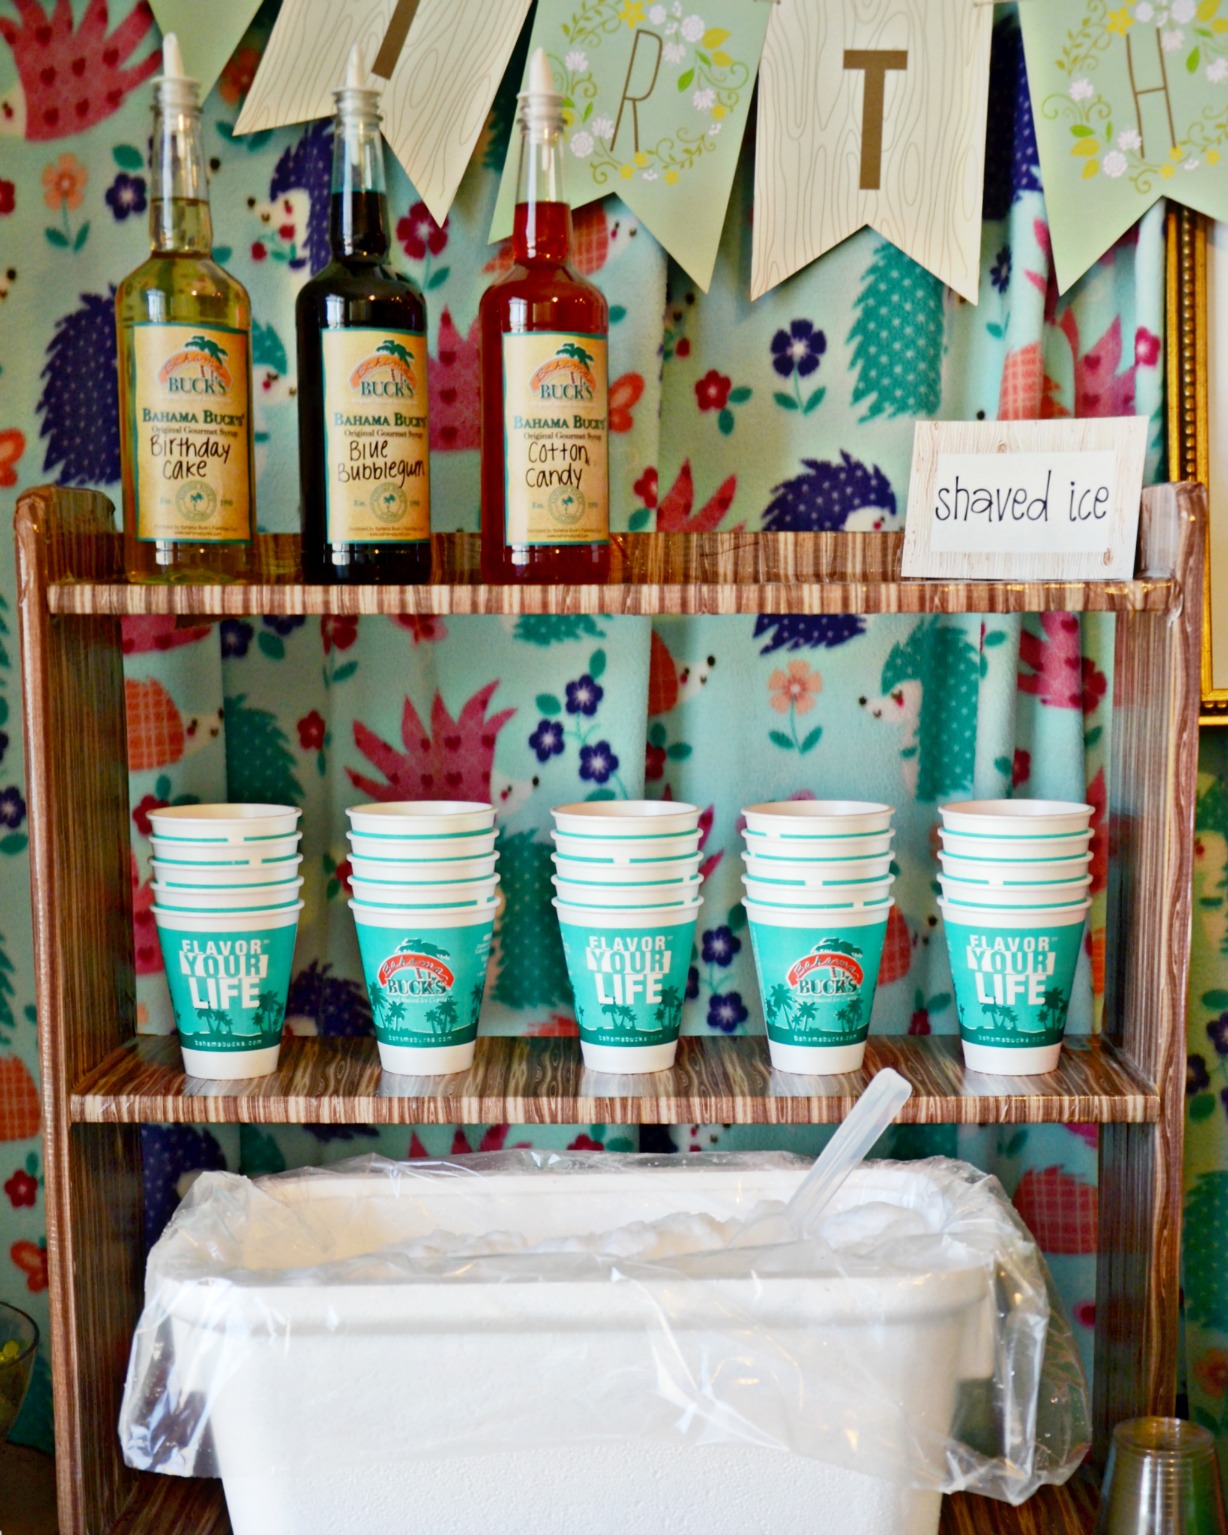 Celebrate at your next birthday party with Bahama Buck's shaved ice instead of cake!